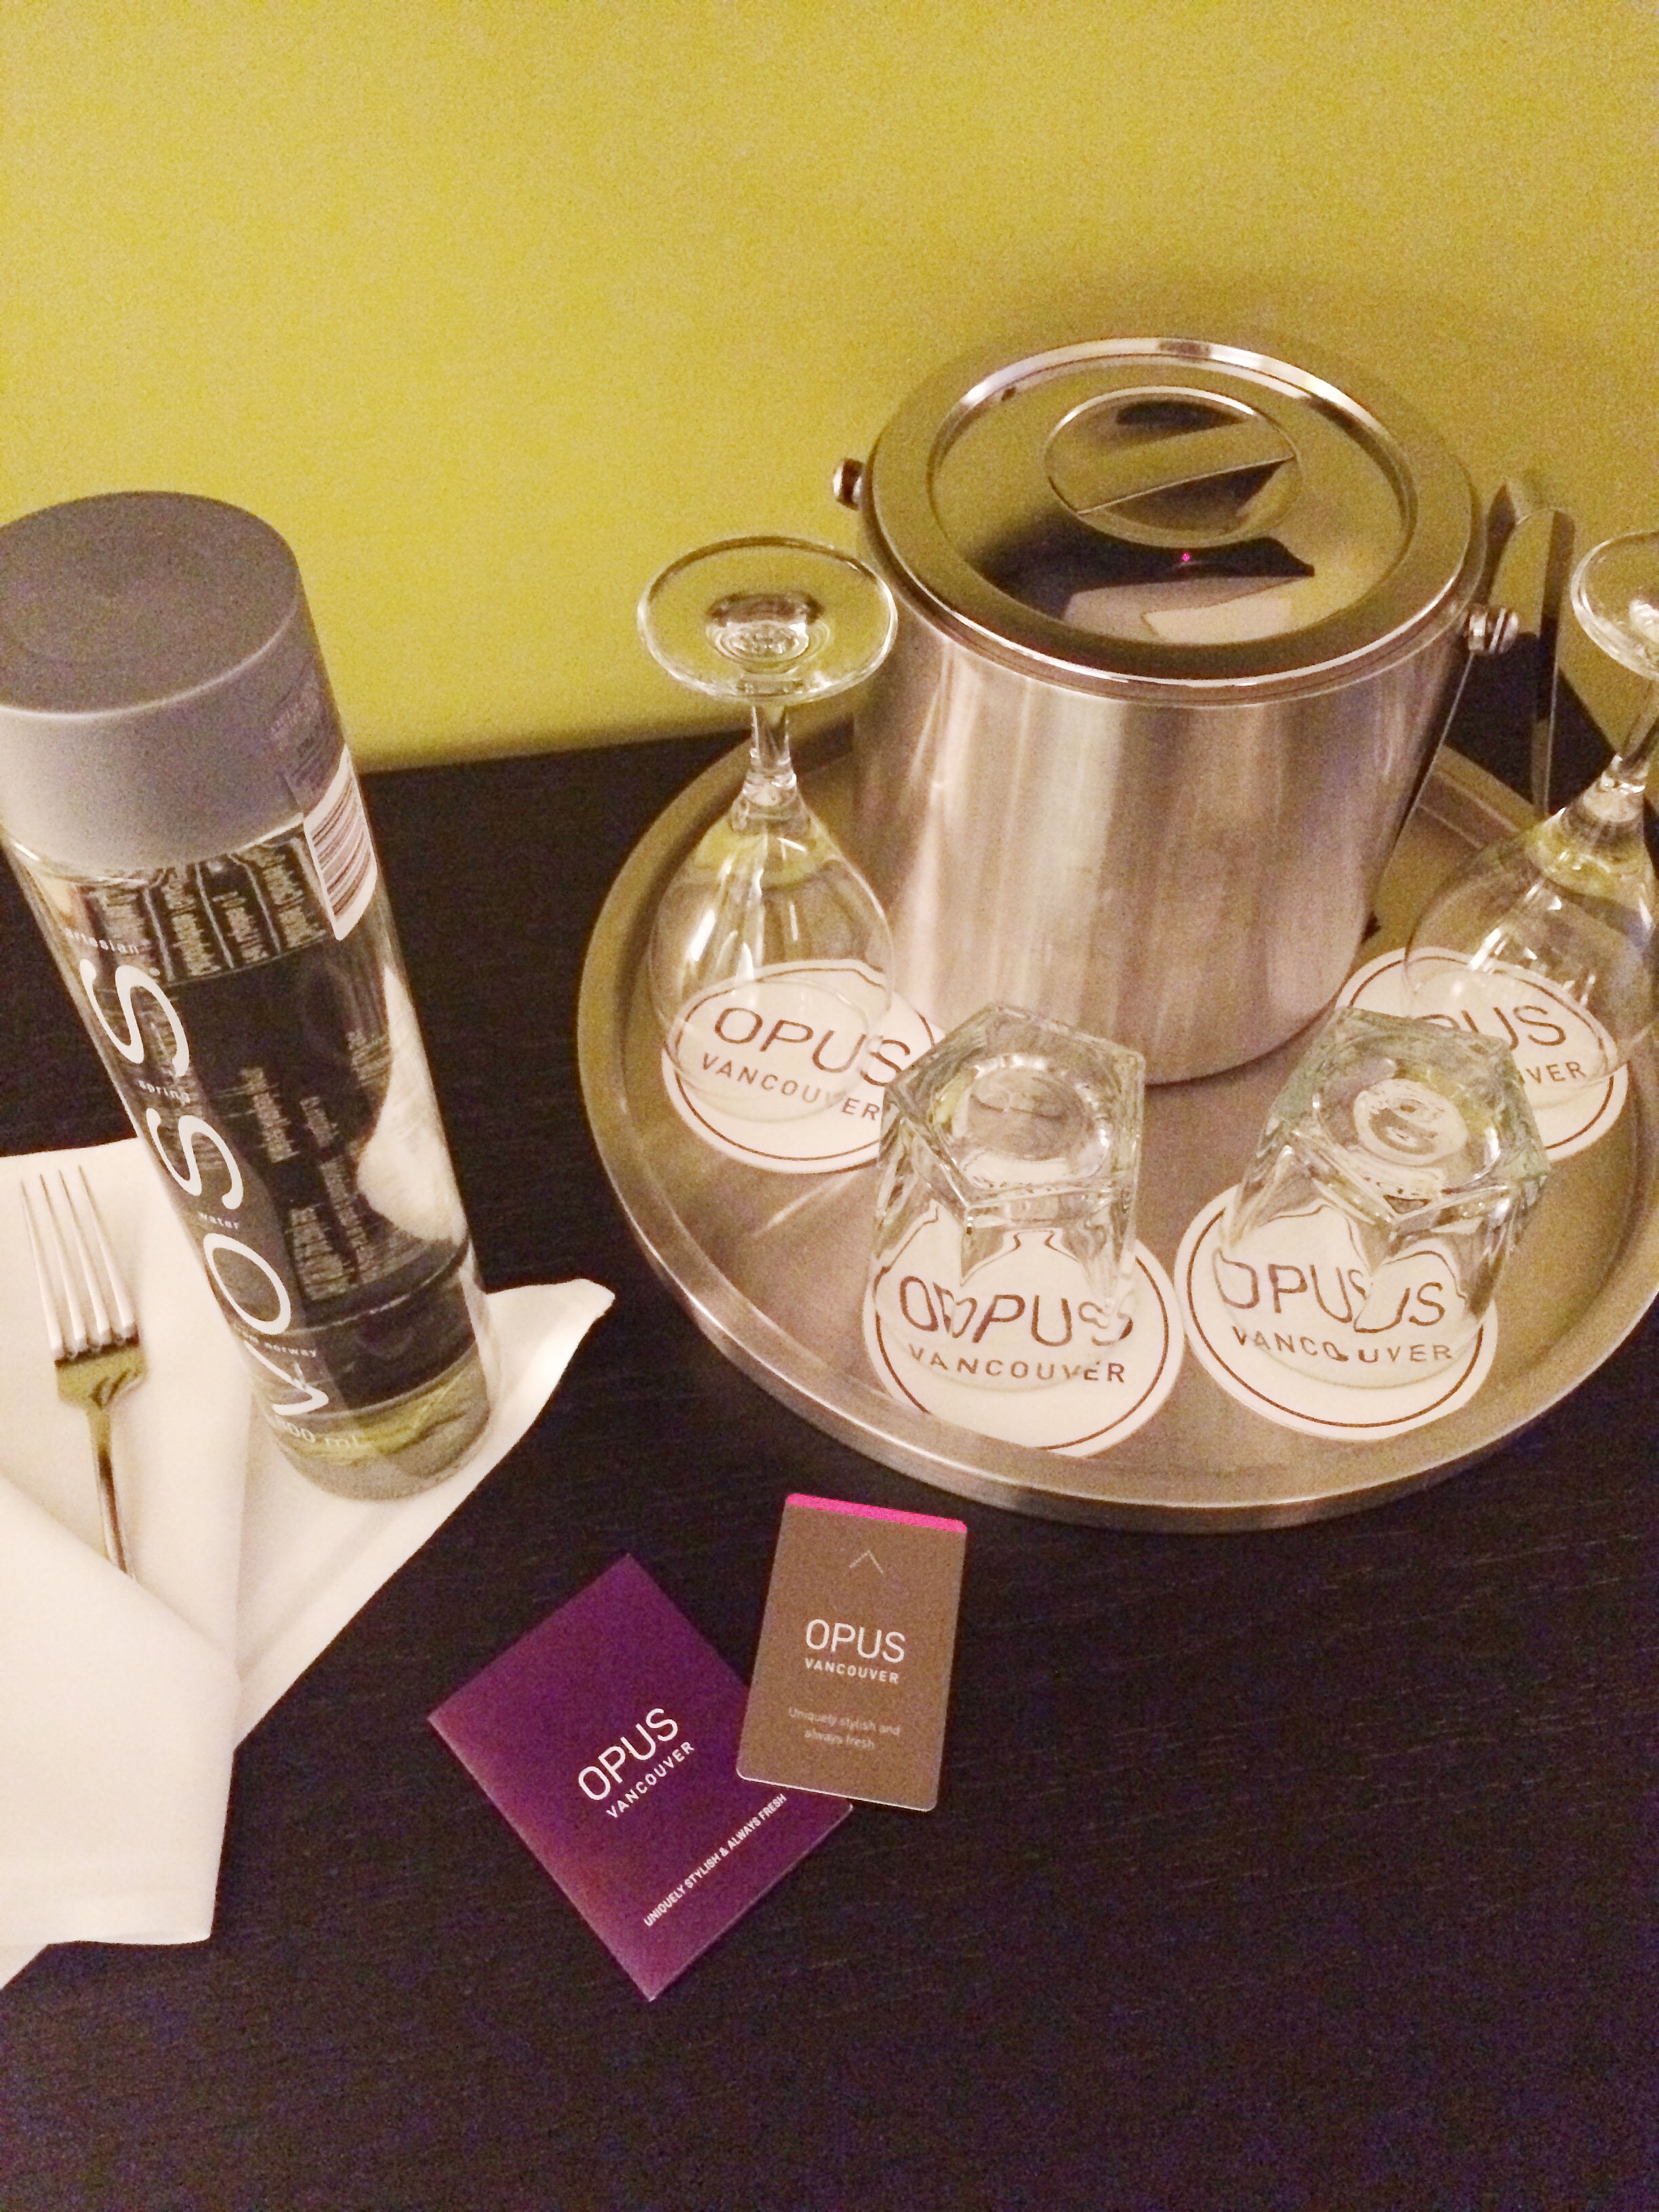 Staycation at the OPUS Hotel in Vancouver